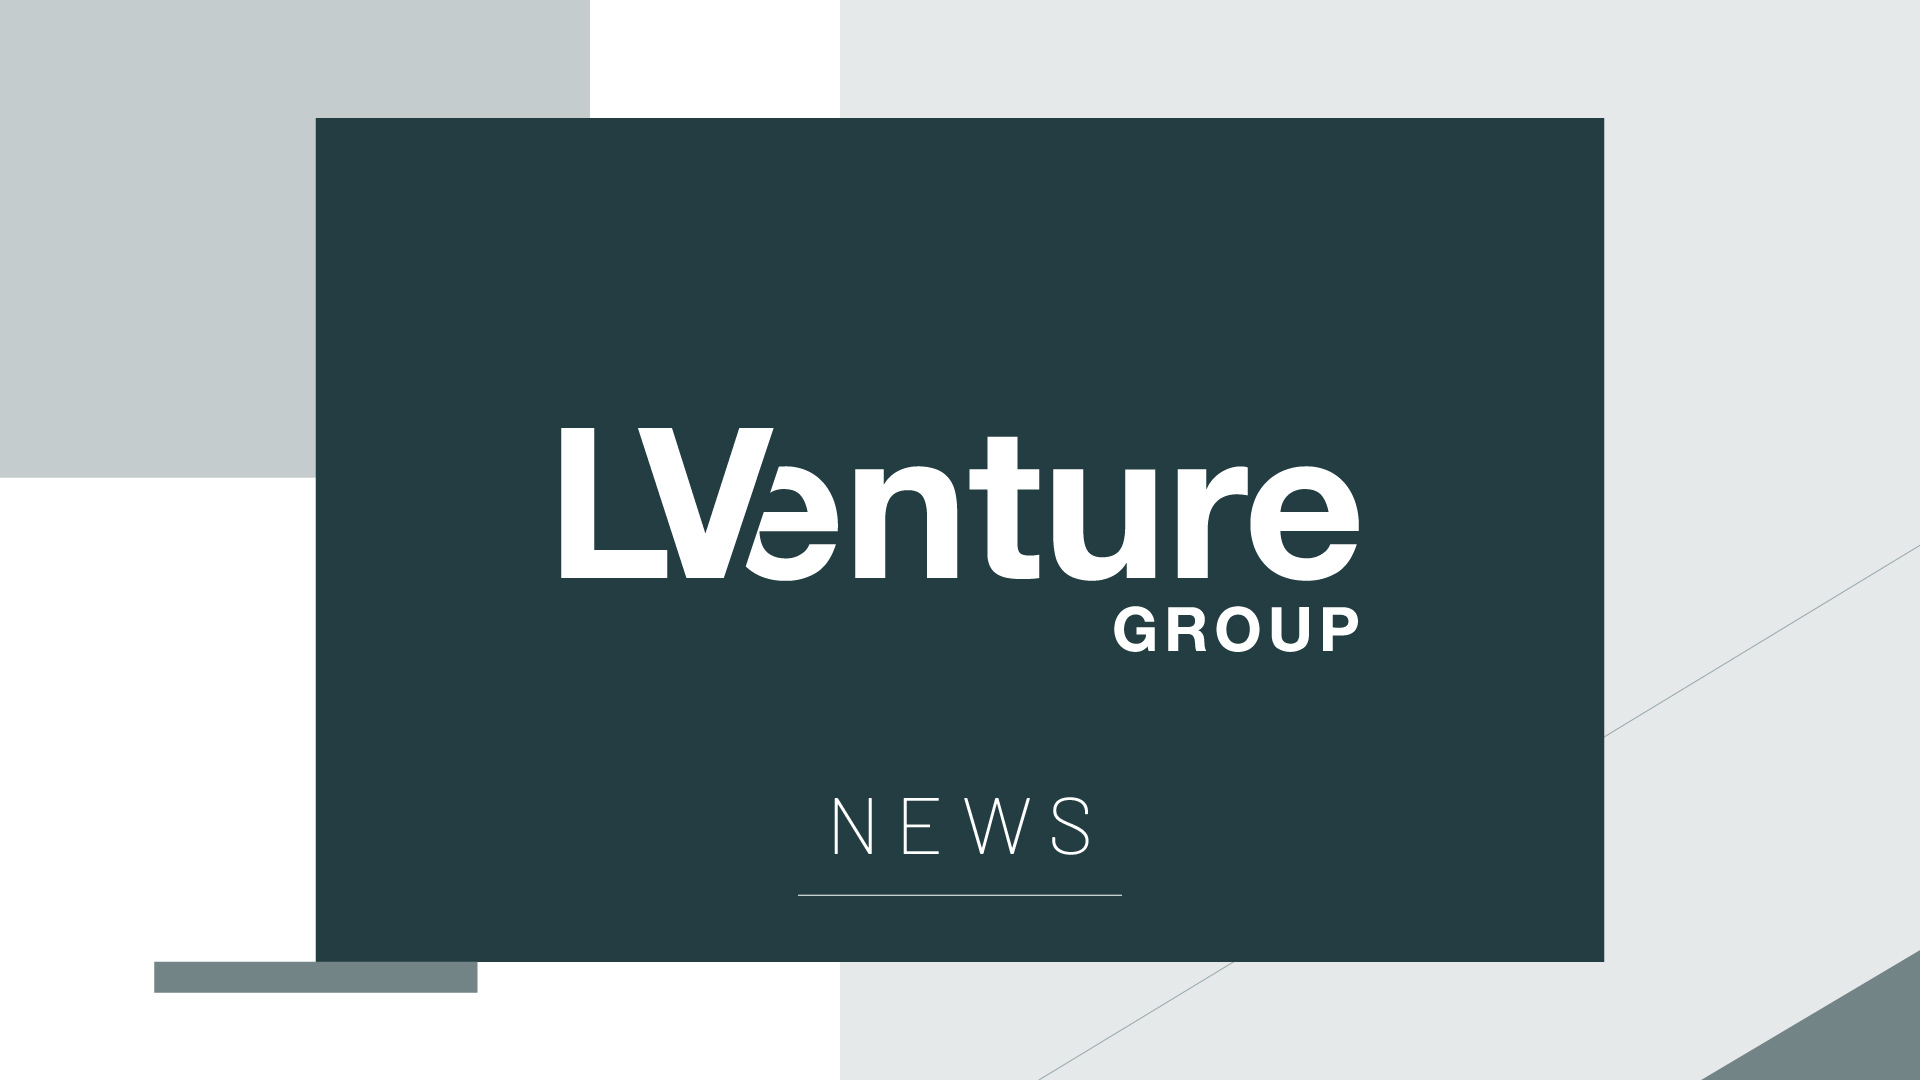 LVenture Group signs a co-investment agreement with Hatcher+ and increases its boost to €145K in every startup participating in the LUISS EnLabs acceleration program